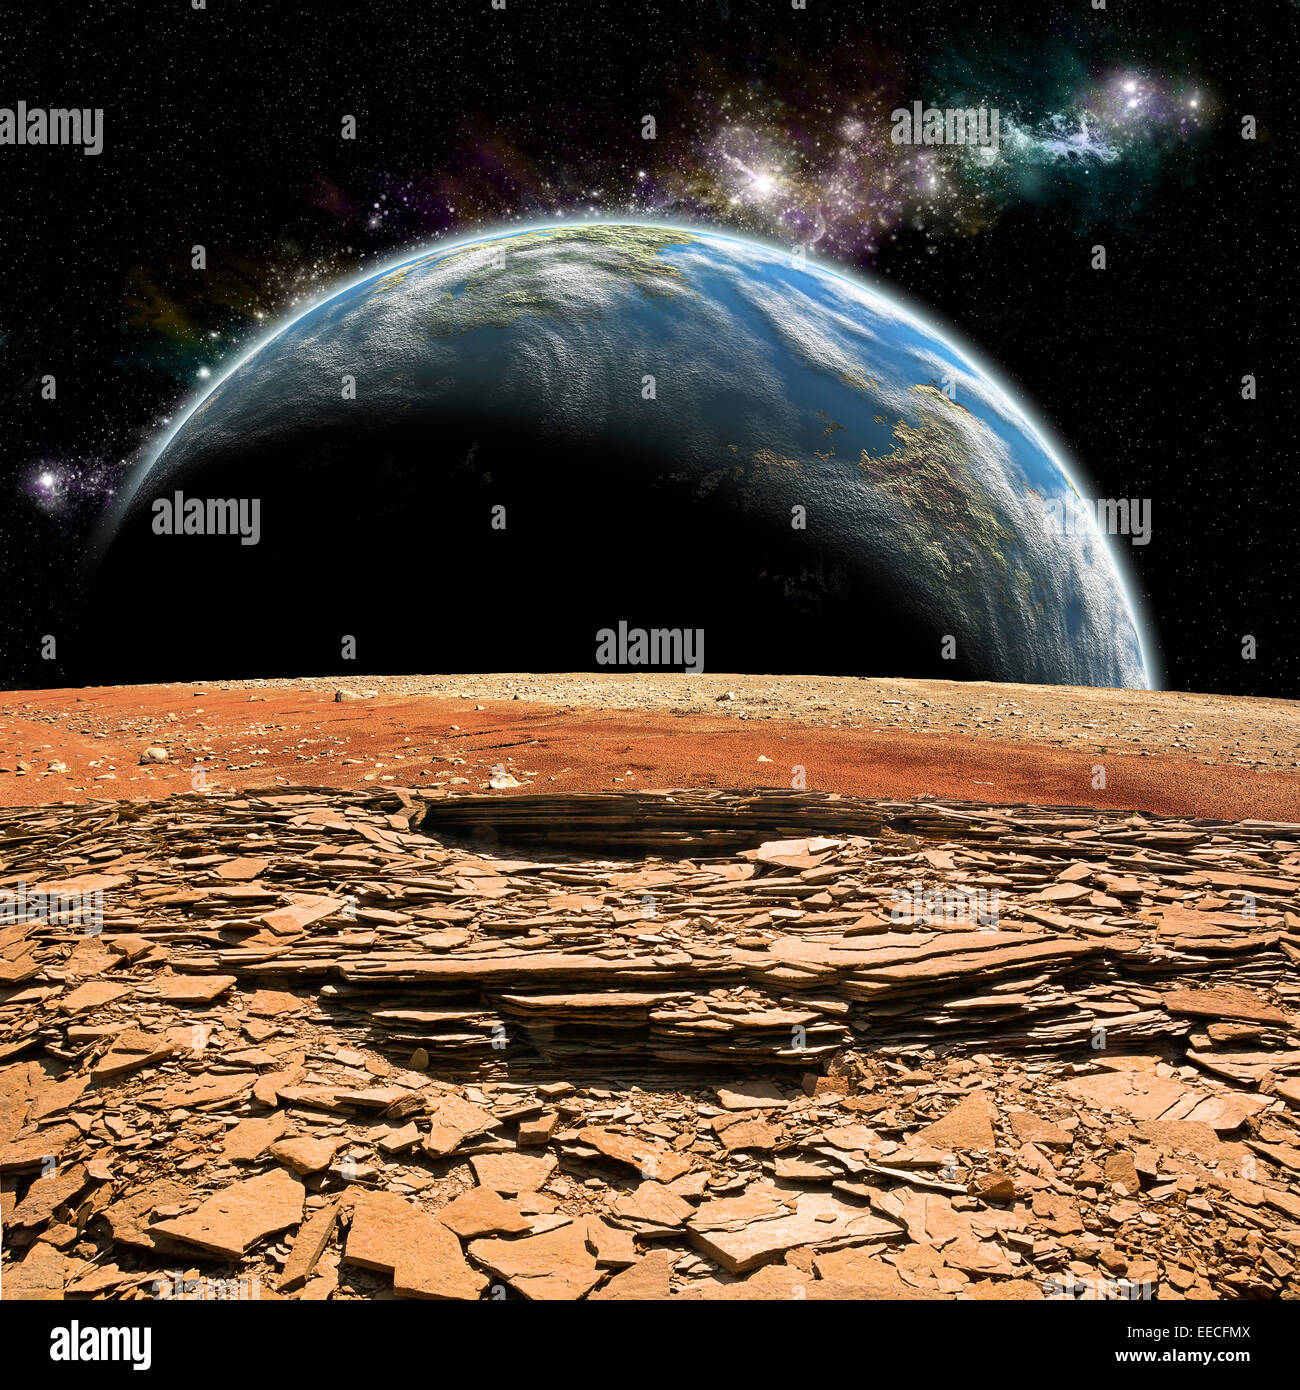 An artist's depiction of the view from a rocky and barren alien moon. An Earth-like planet rises over the airless environment. Stock Photo